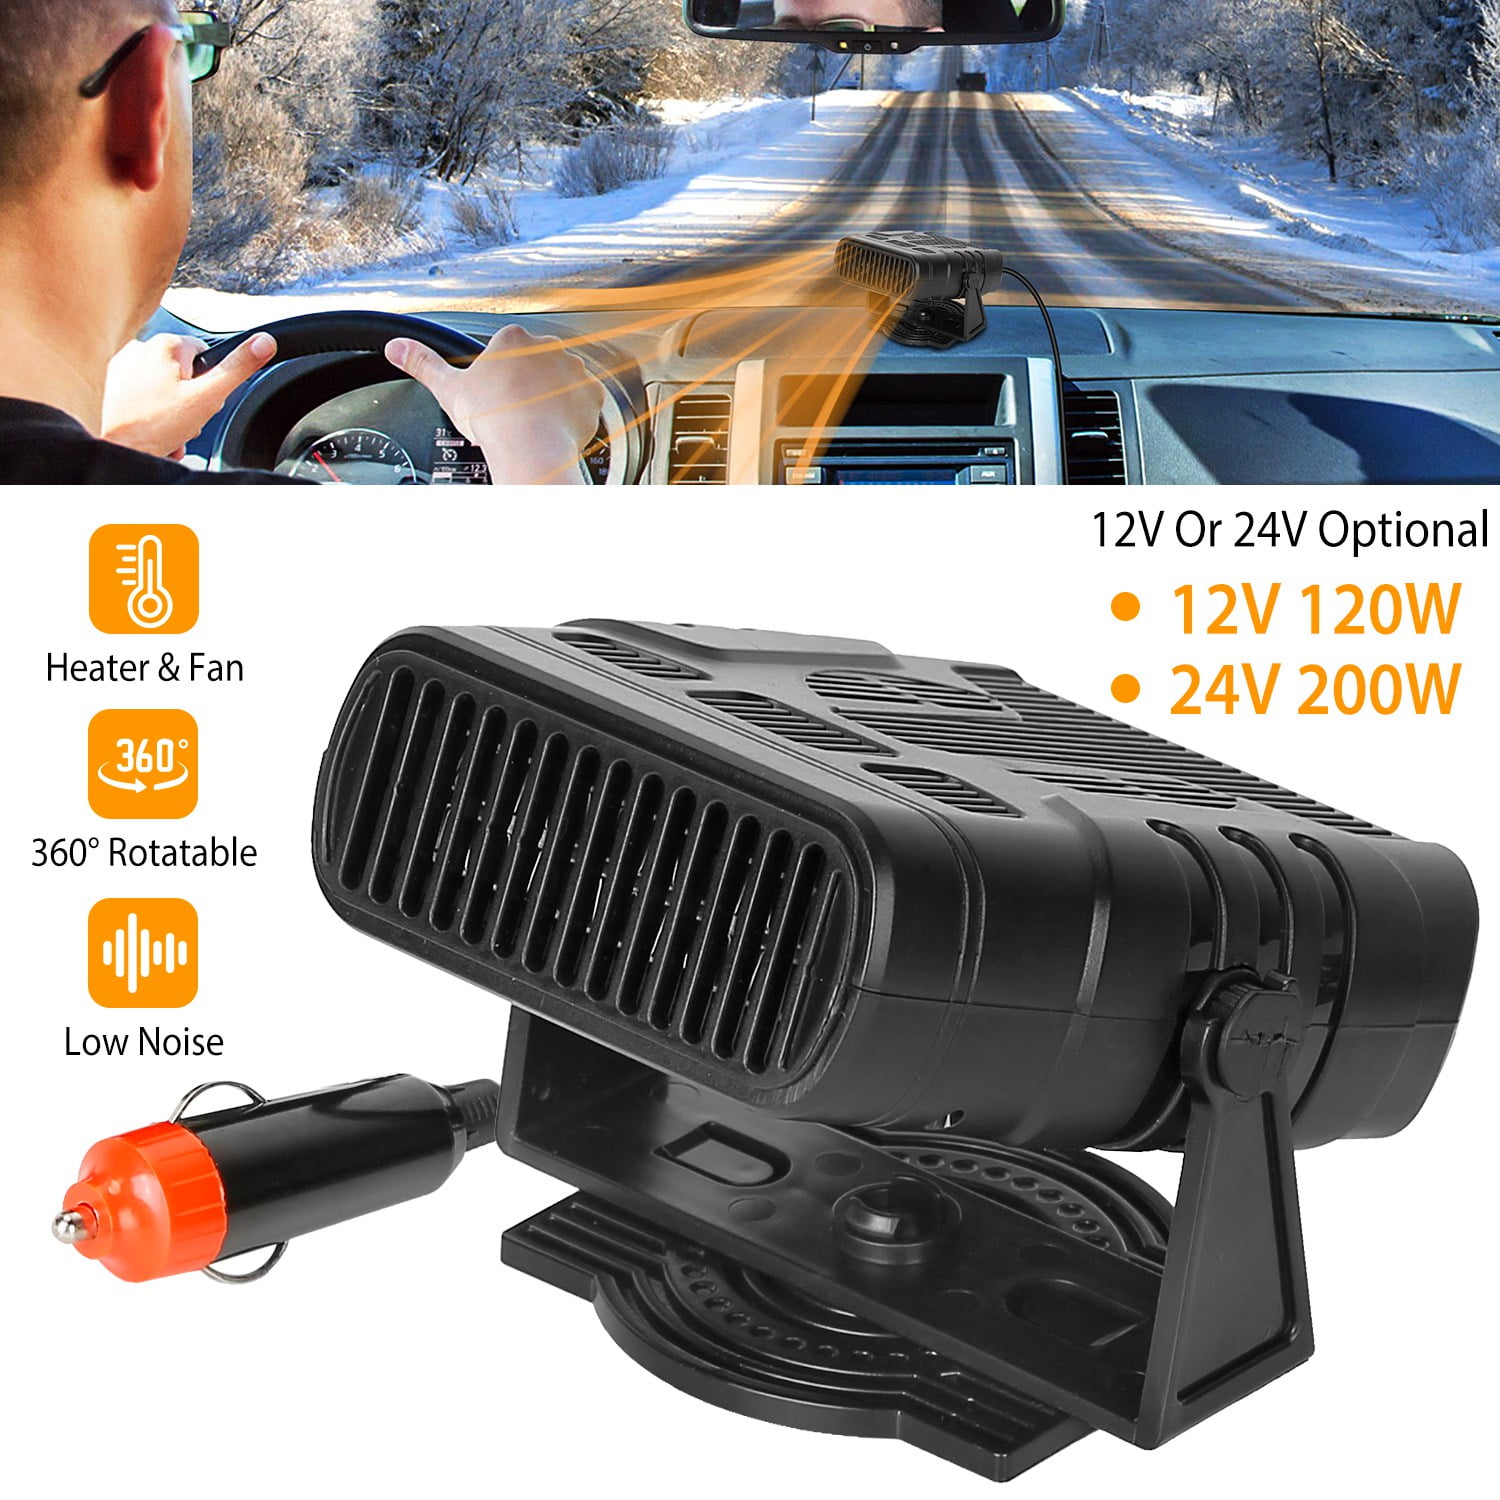  Car Defroster,12v 200w Portable Car Heater, 2 In 1